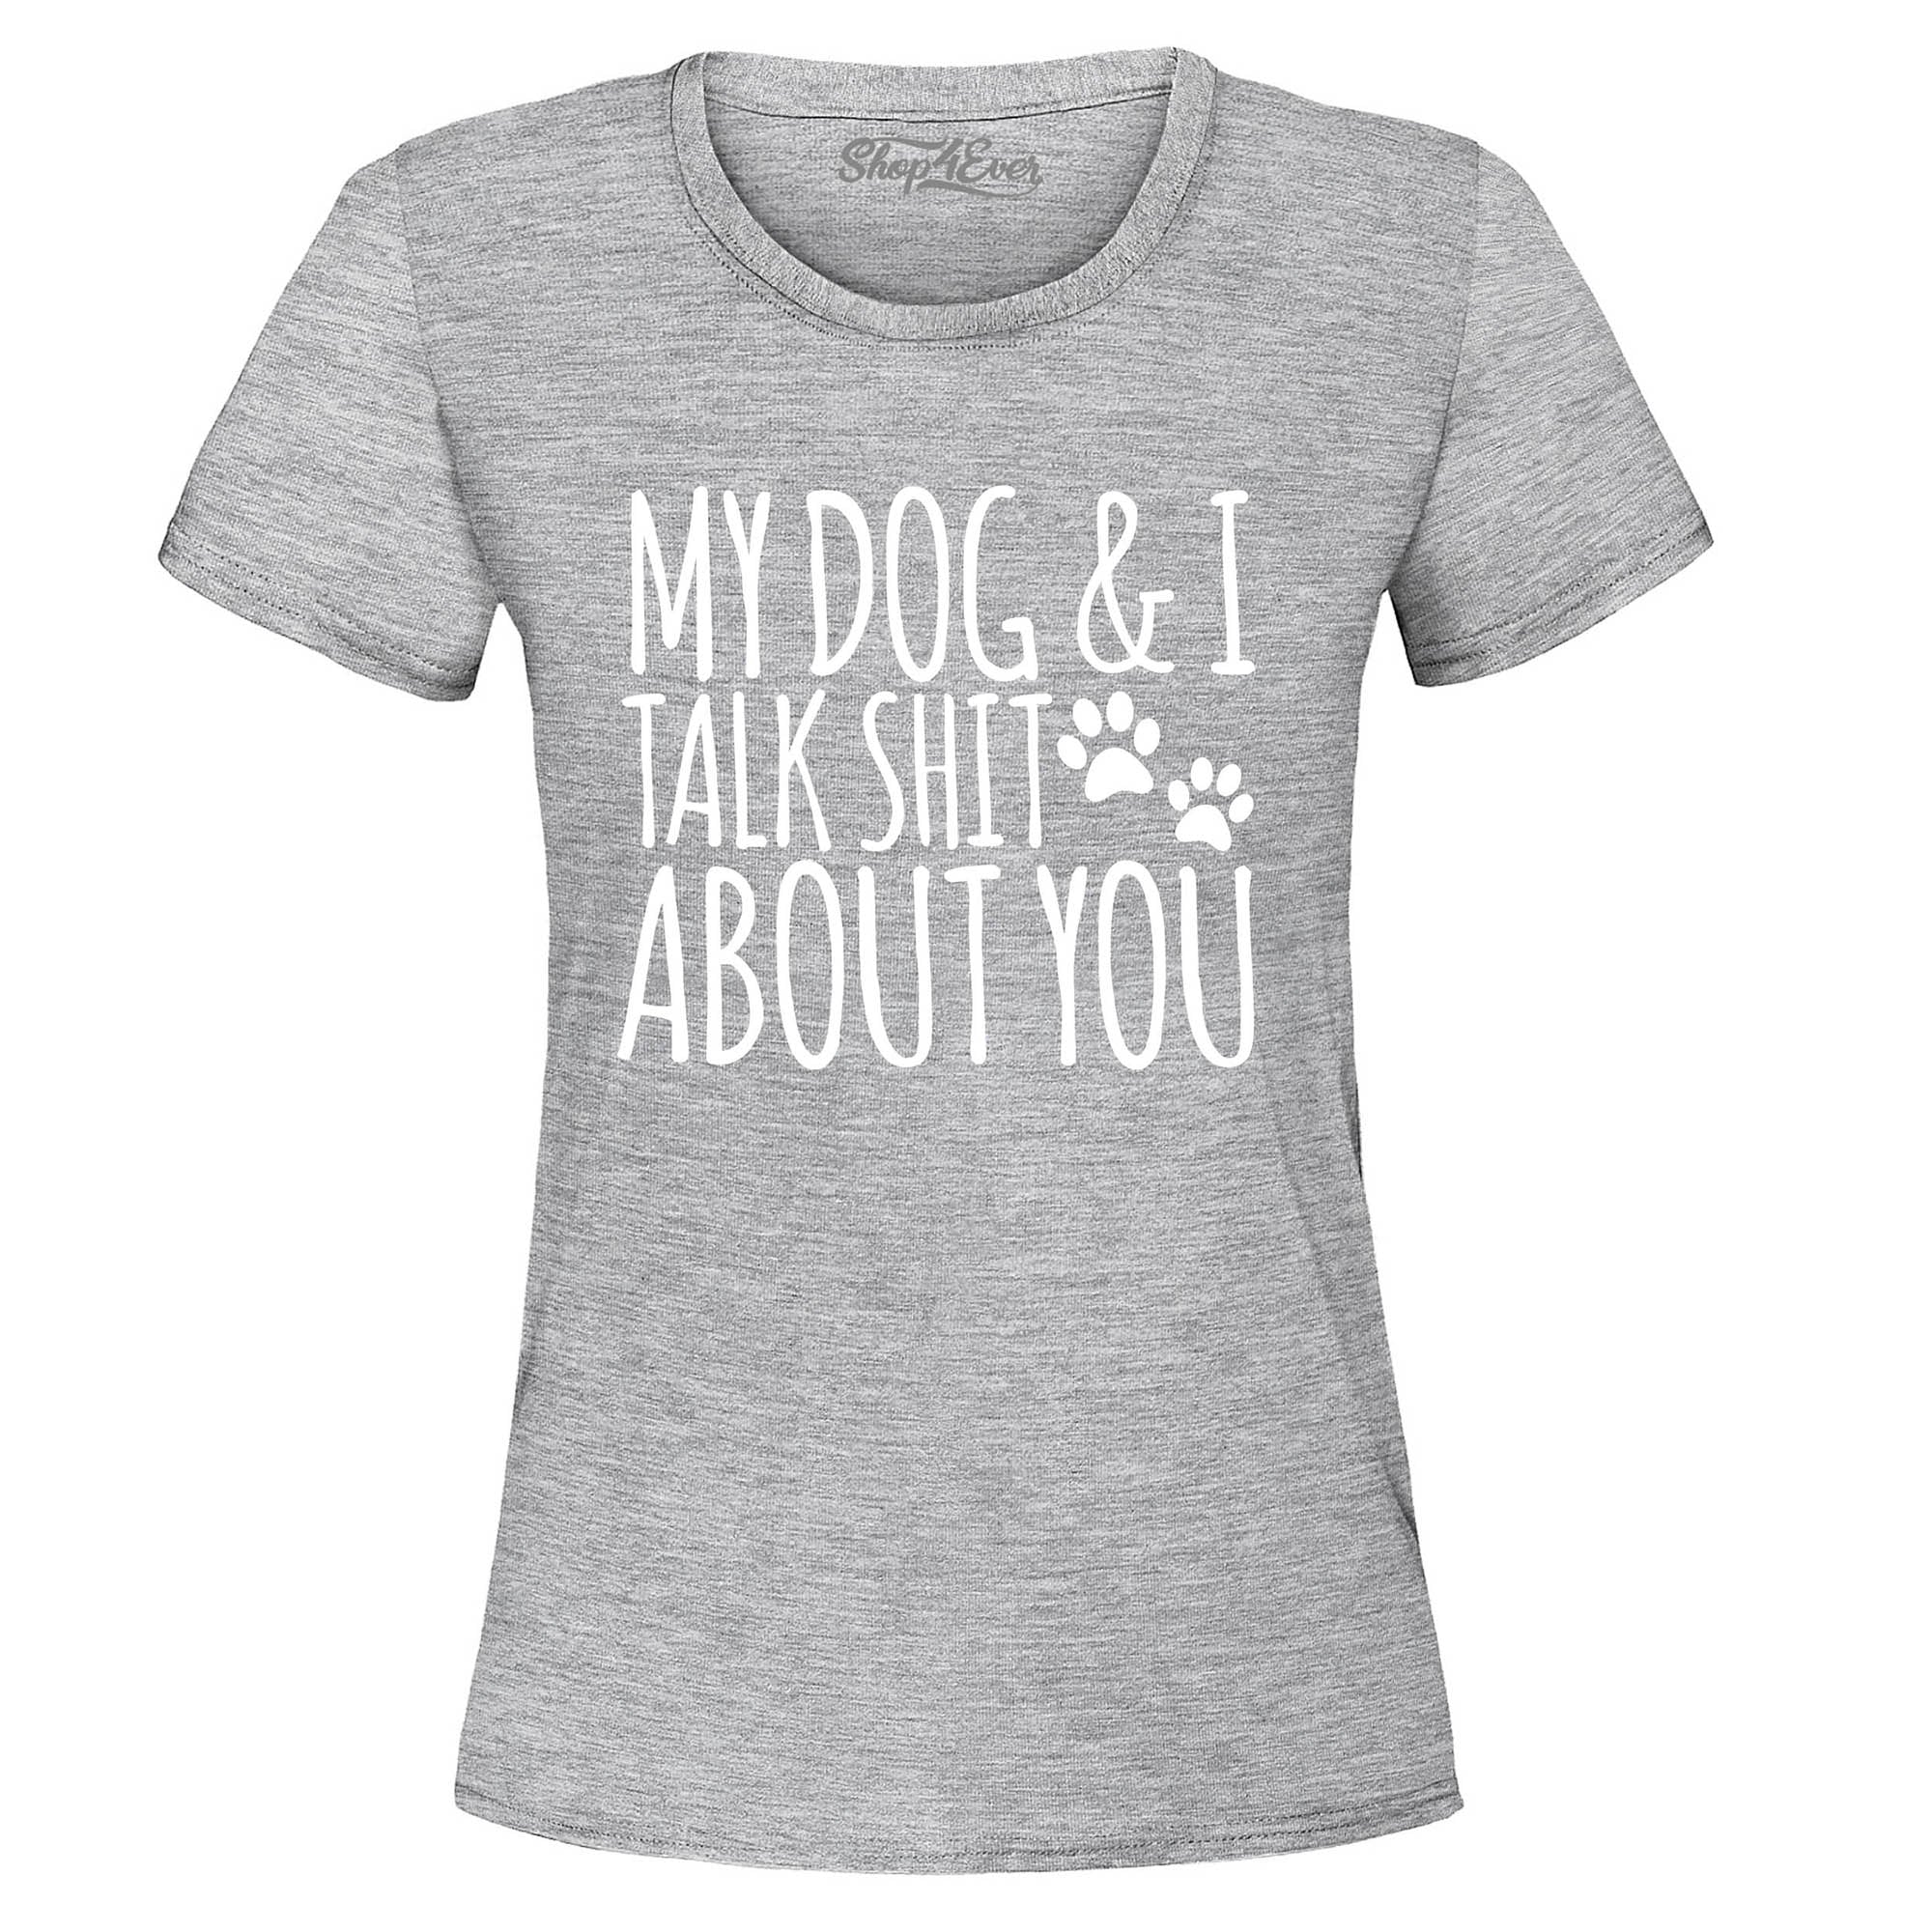 My Dog and I Talk Shit About You Women's T-Shirt